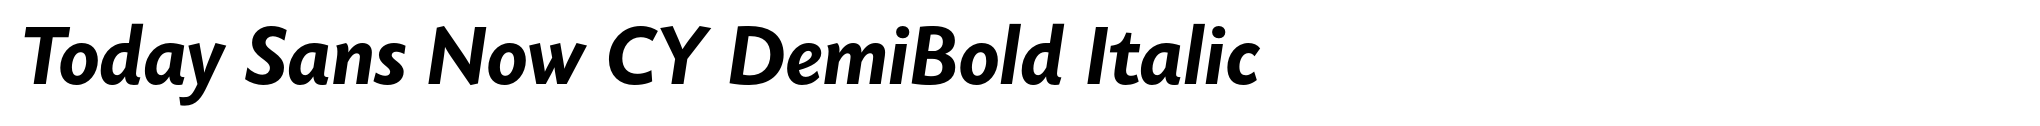 Today Sans Now CY DemiBold Italic image